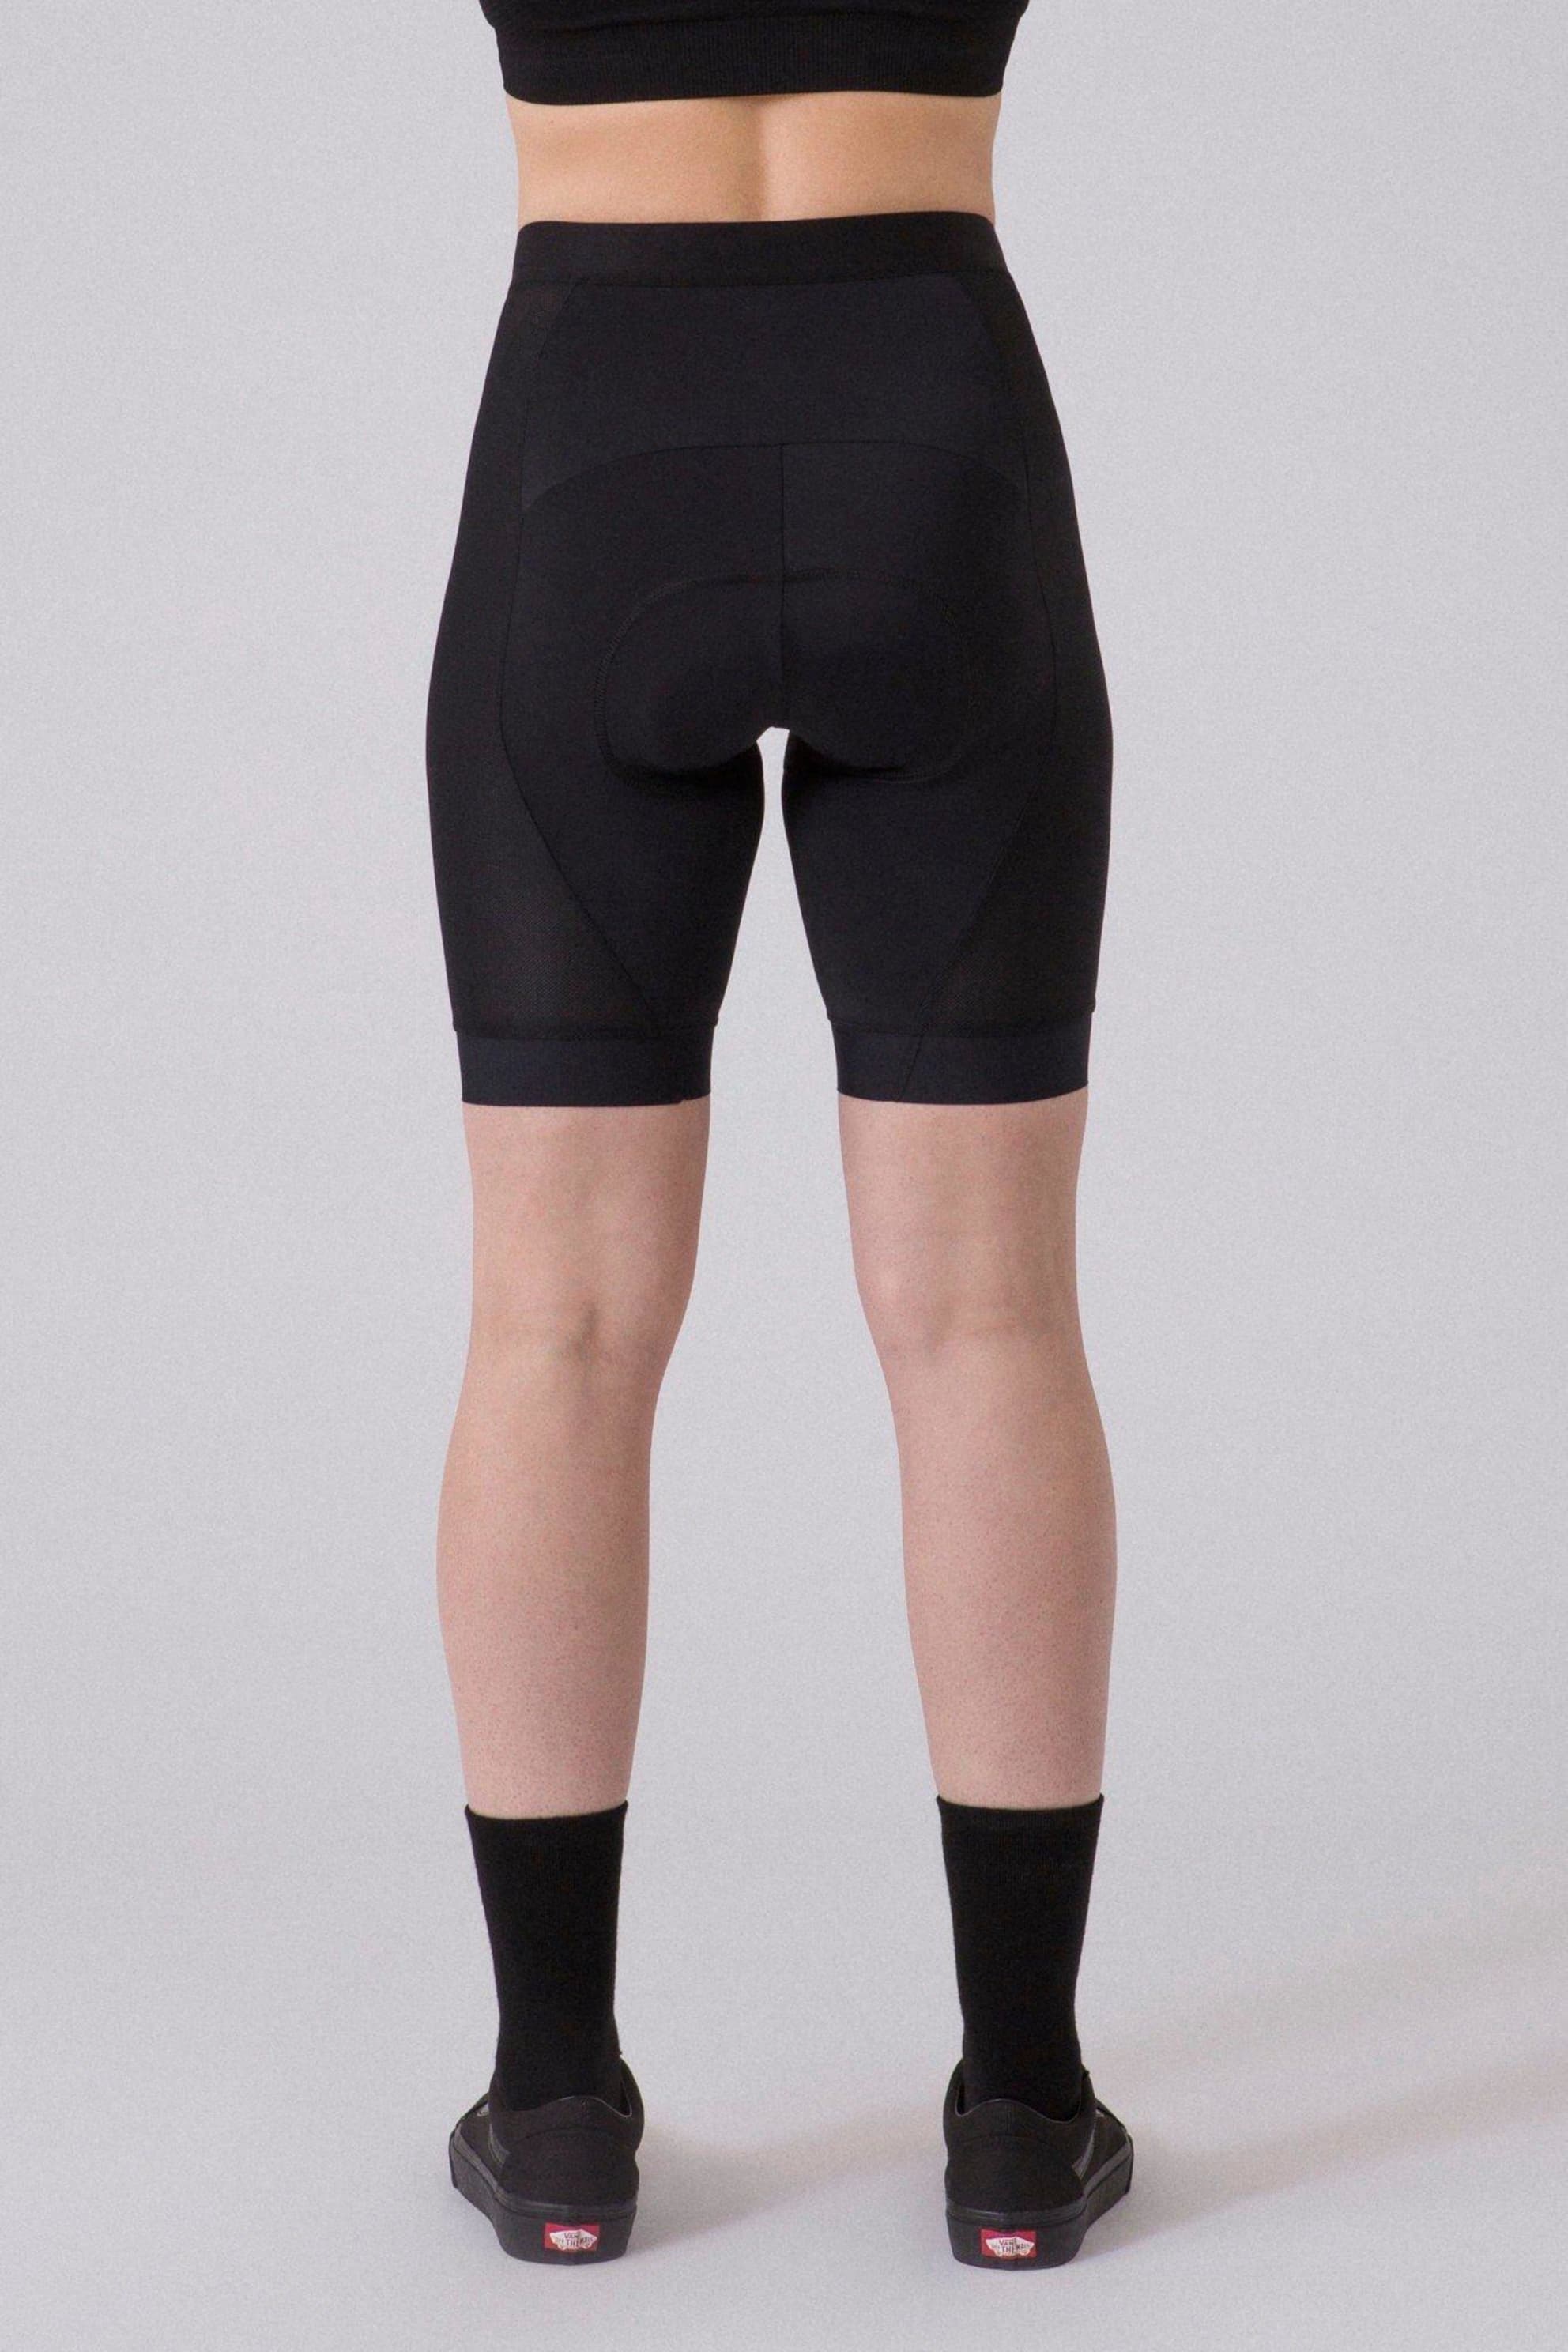 Women's MTB Trail Shorts with Liner | Rapha